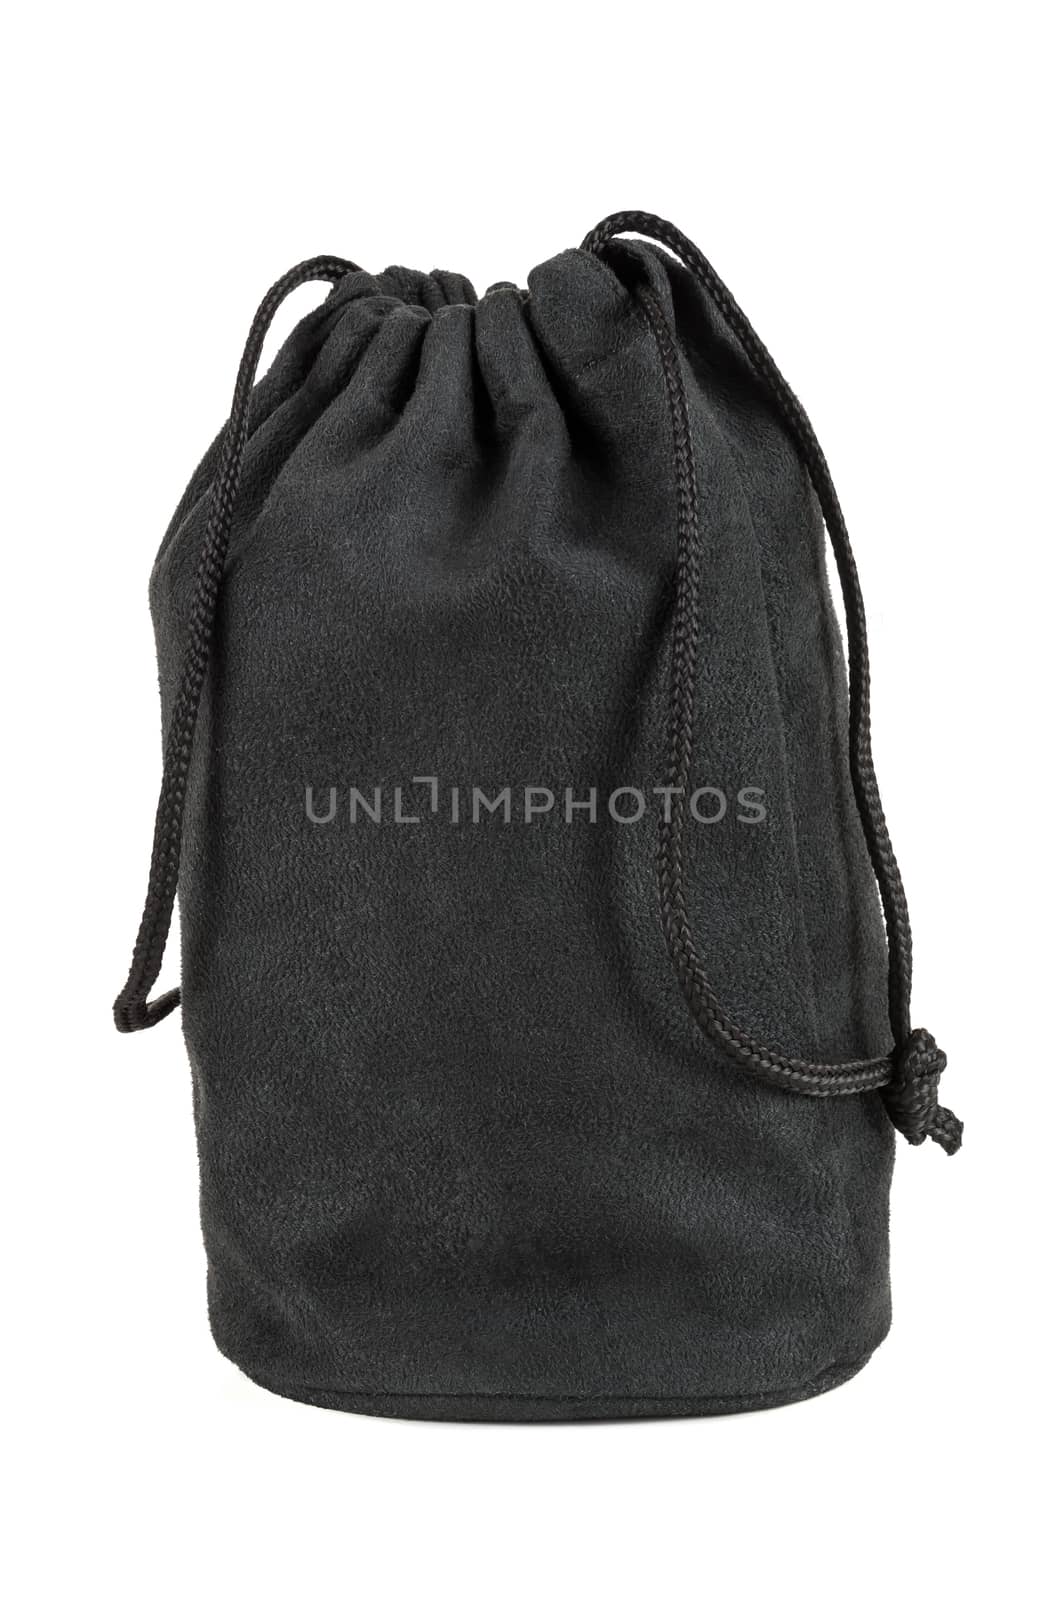 Black textile sack isolated on white background with clipping path